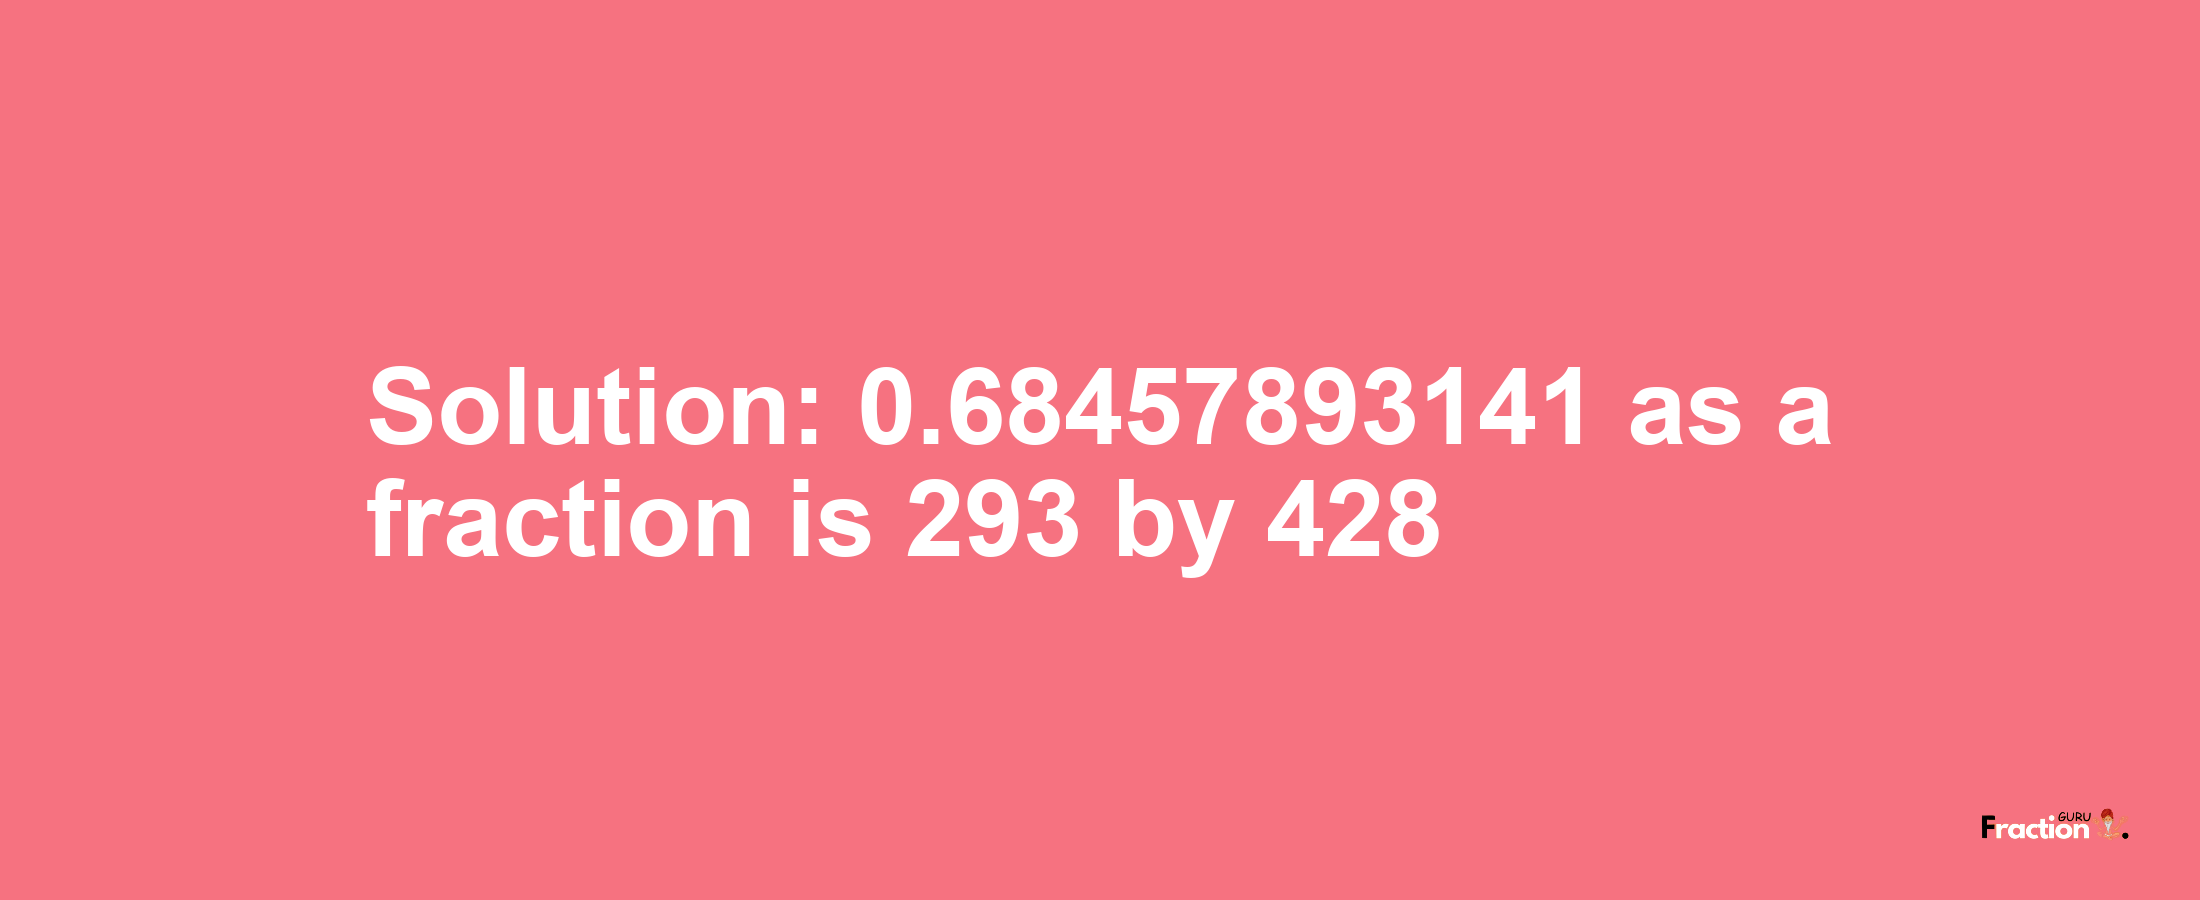 Solution:0.68457893141 as a fraction is 293/428